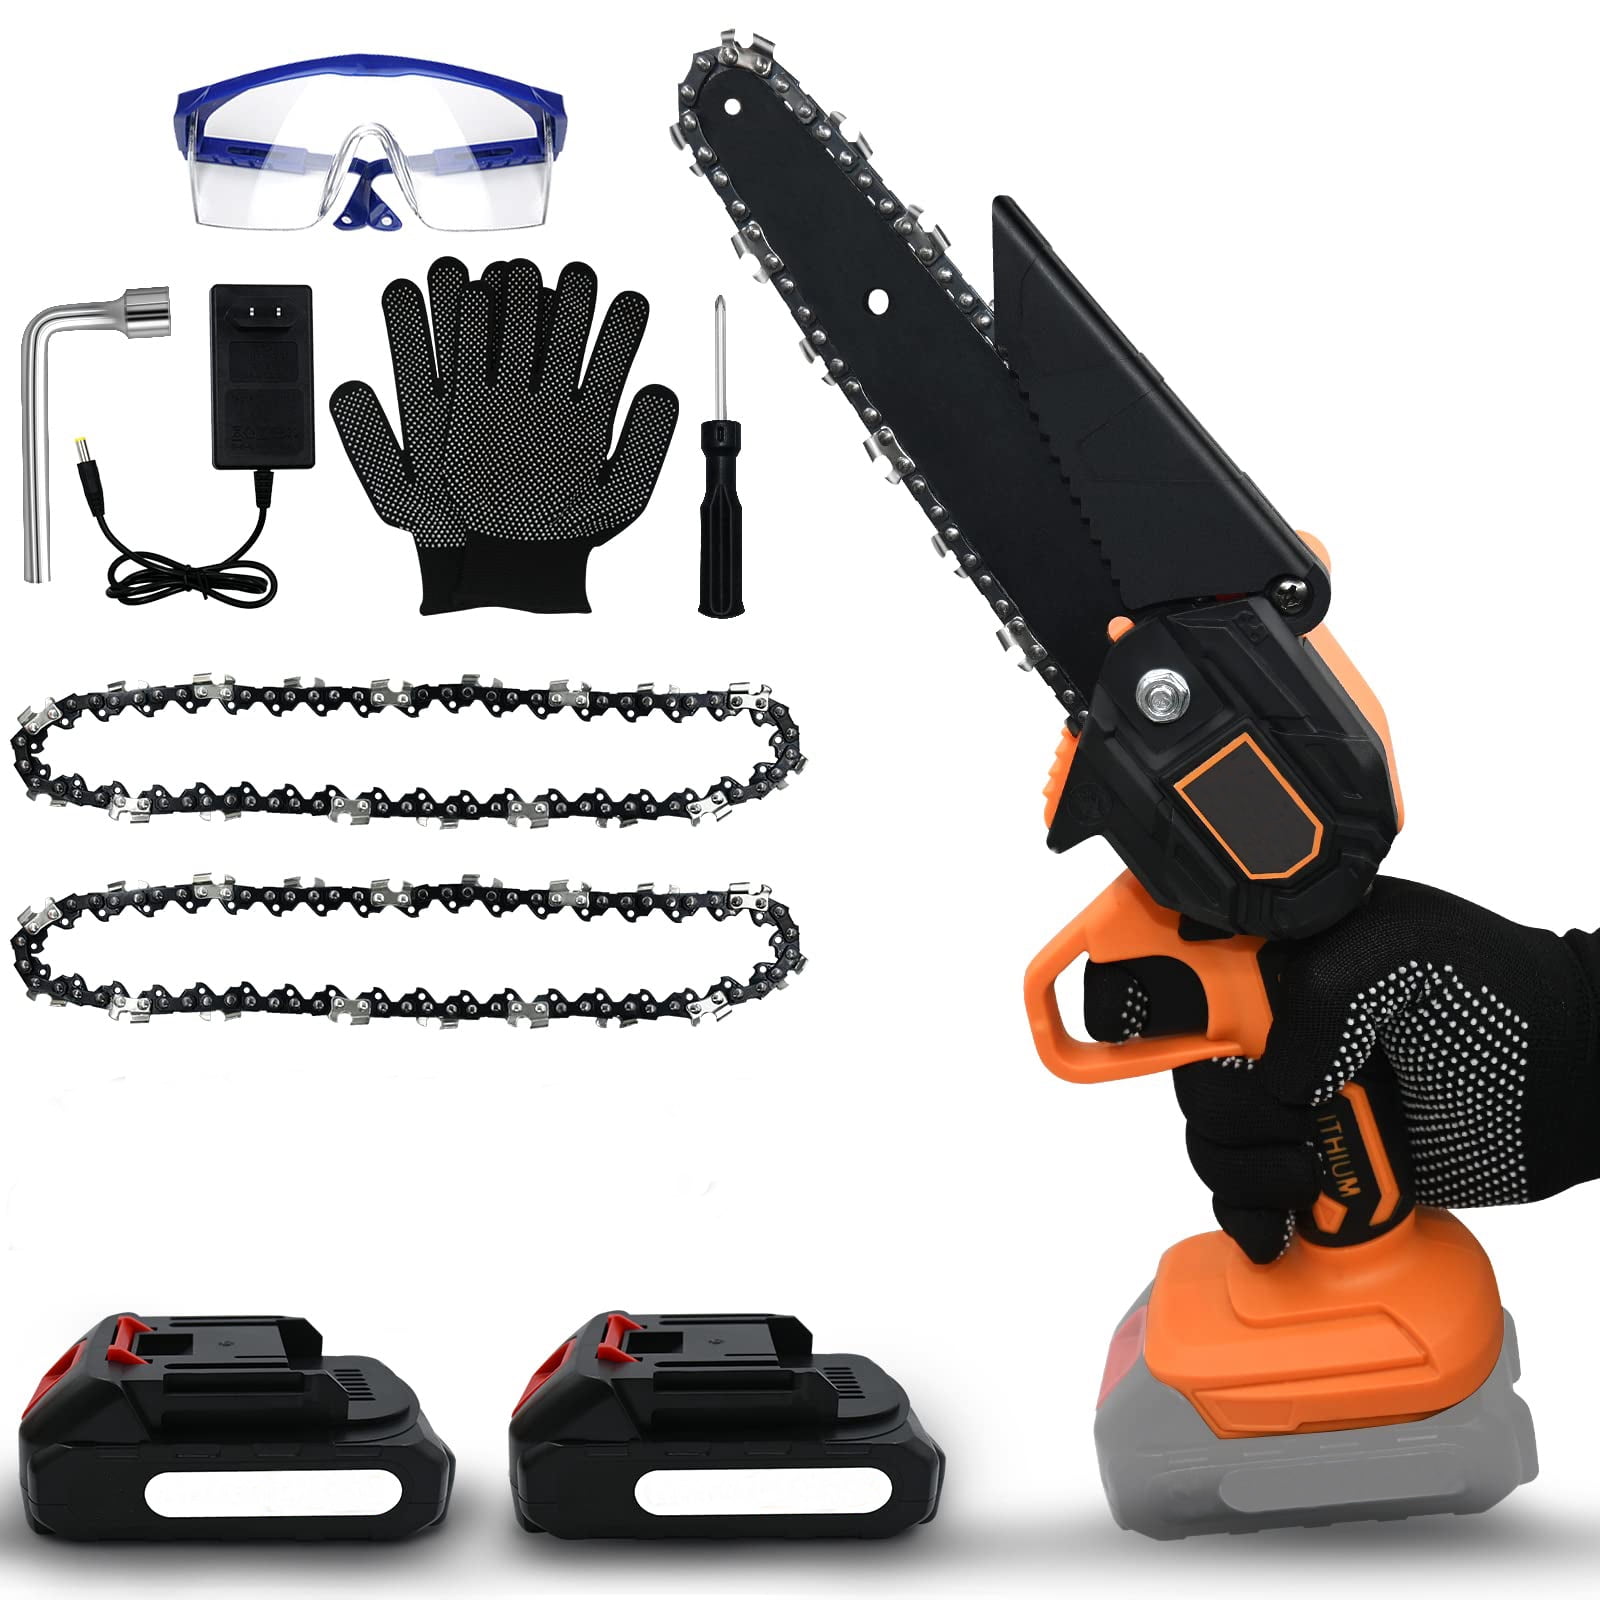 4-Inch Battery powered Chainsaw Mini Chainsaw Cordless Handheld Portable Electric chain saws for Wood Cutting Splash Guard & Switch Security Lock Tree Pruning 2 Pcs 24V Rechargeable Battery 